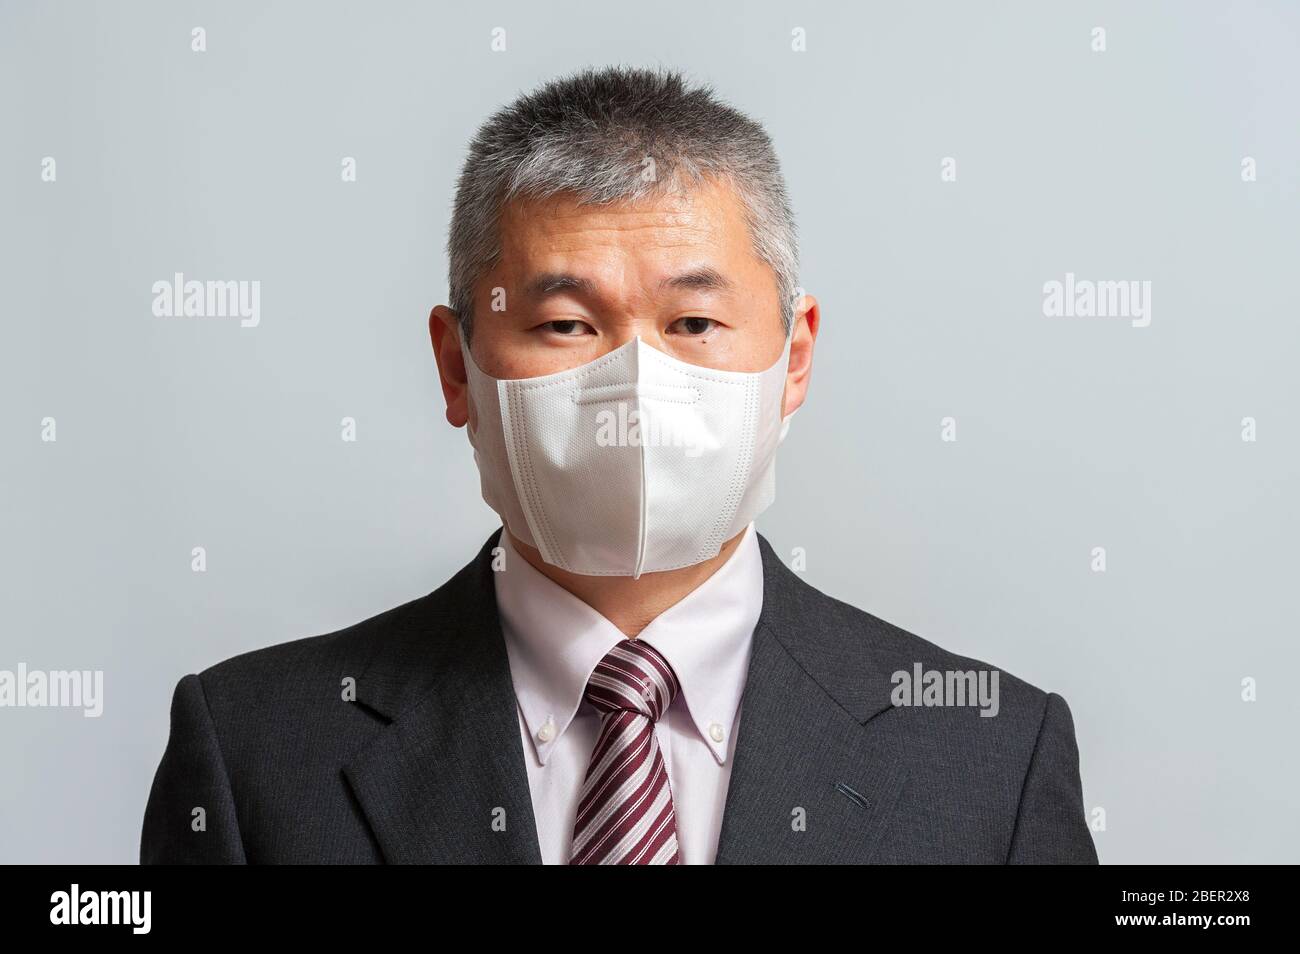 Front view of middle aged Asian man with suit and tie wearing white disposable 3D face mask for protection against novel coronavirus (COVID-19). Stock Photo